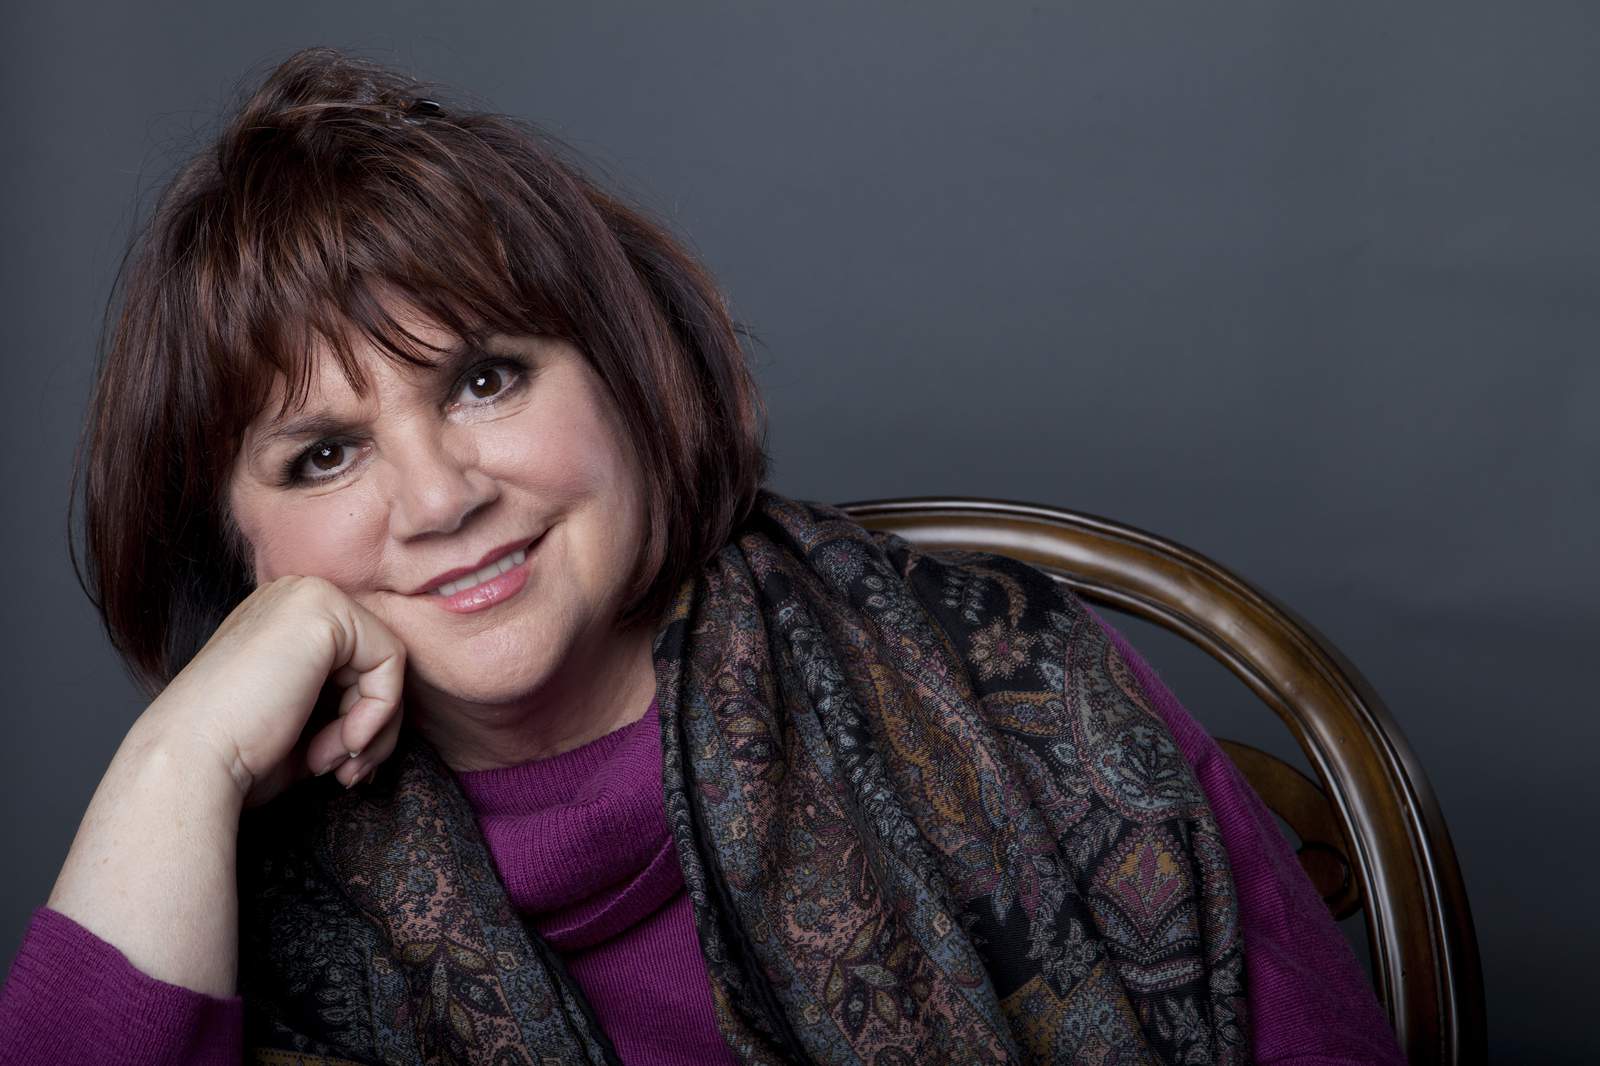 Linda Ronstadt looks back at her most cherished moments